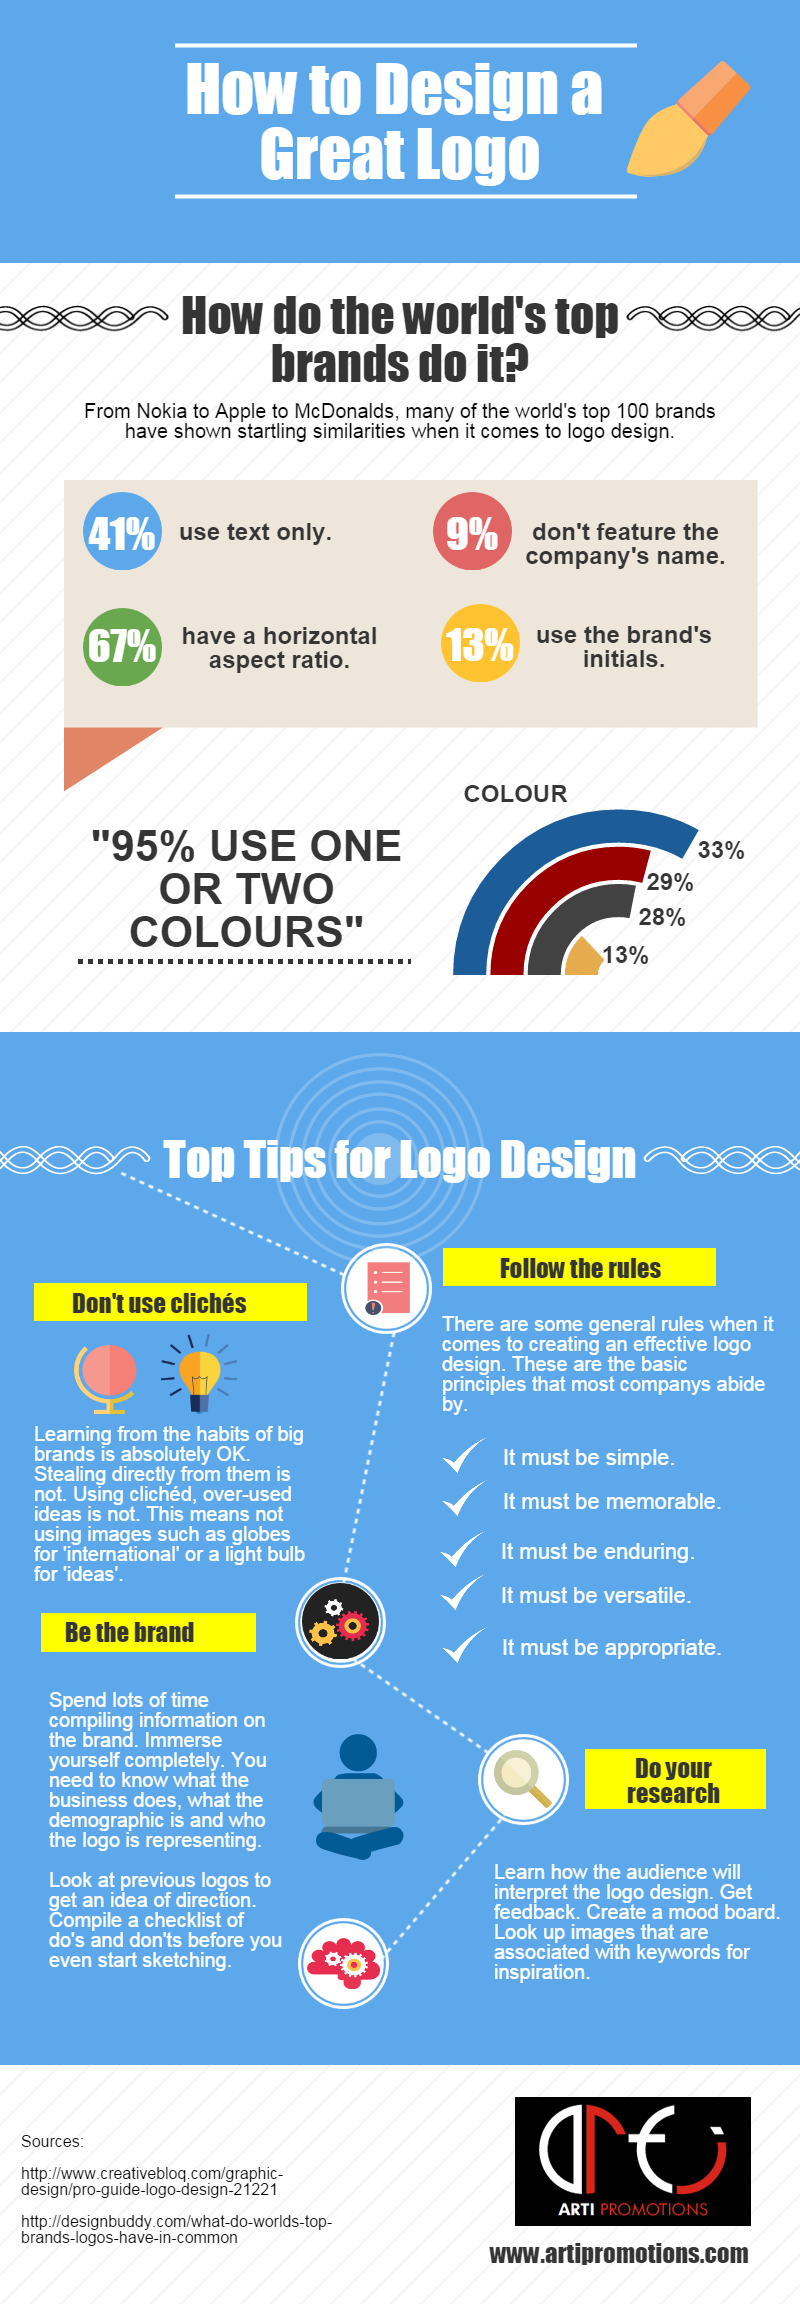 How to design a great logo